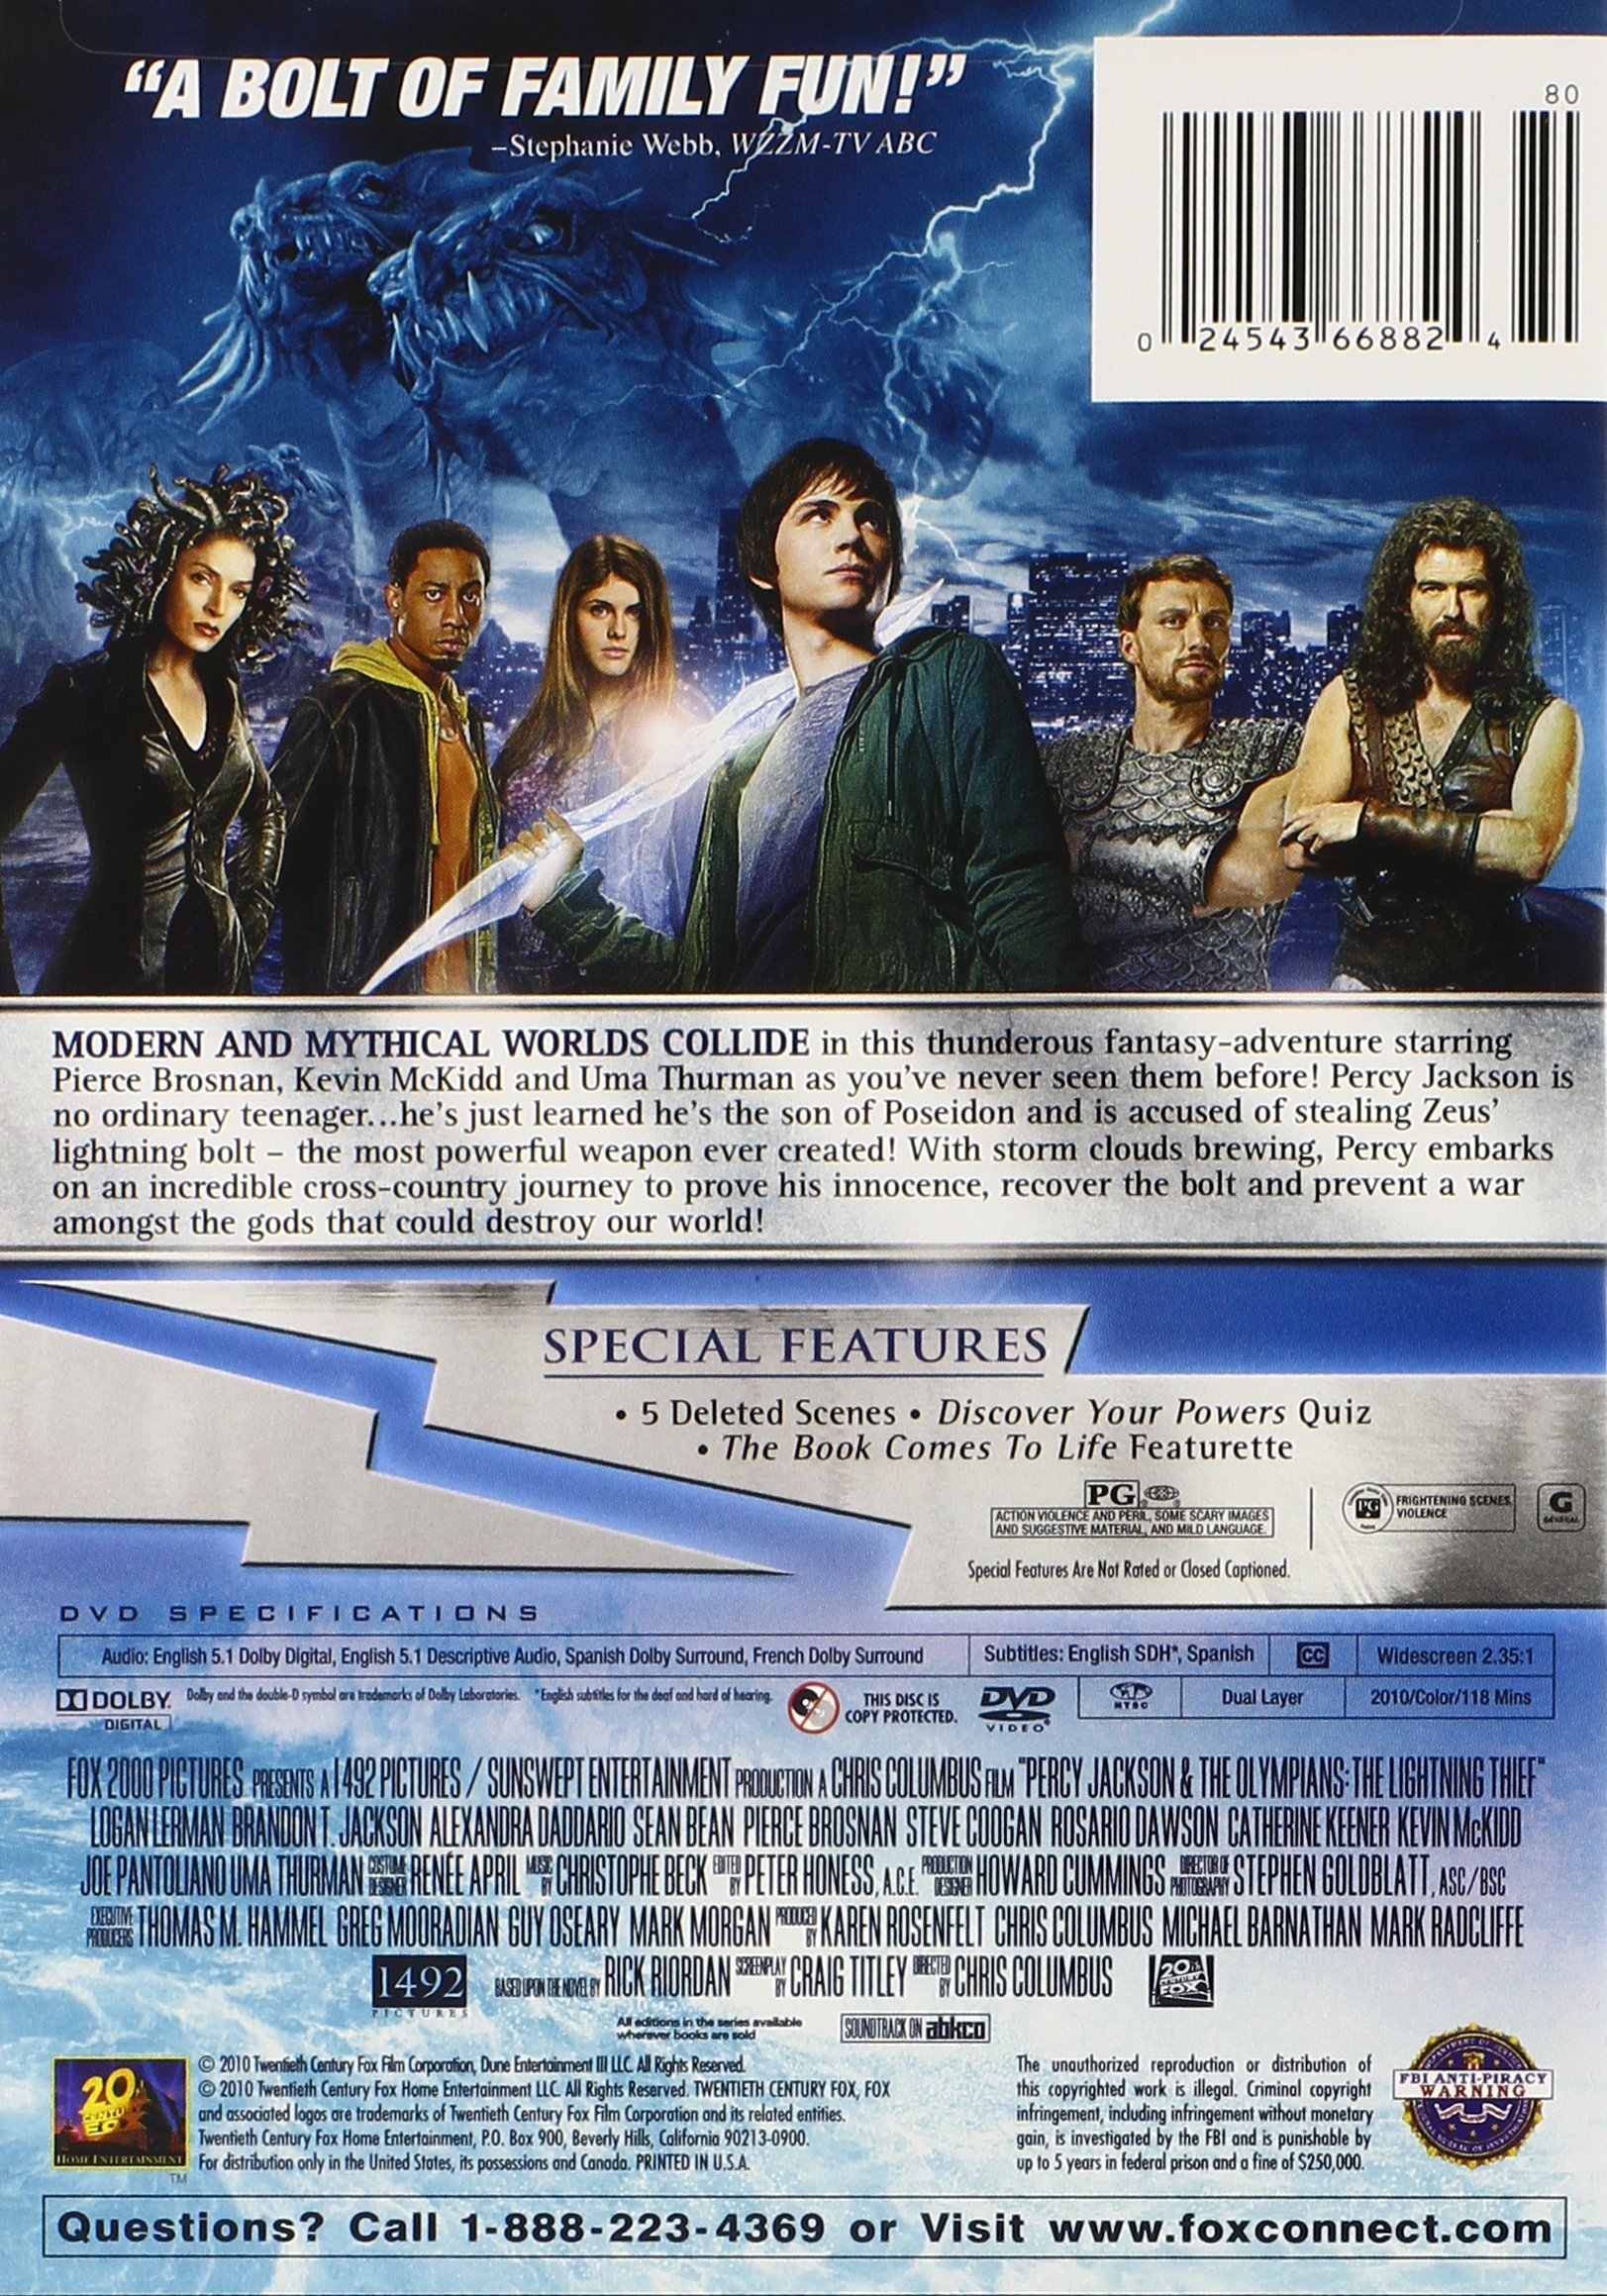 Percy Jackson & the Olympians: The Lightning Thief (DVD) - image 2 of 2